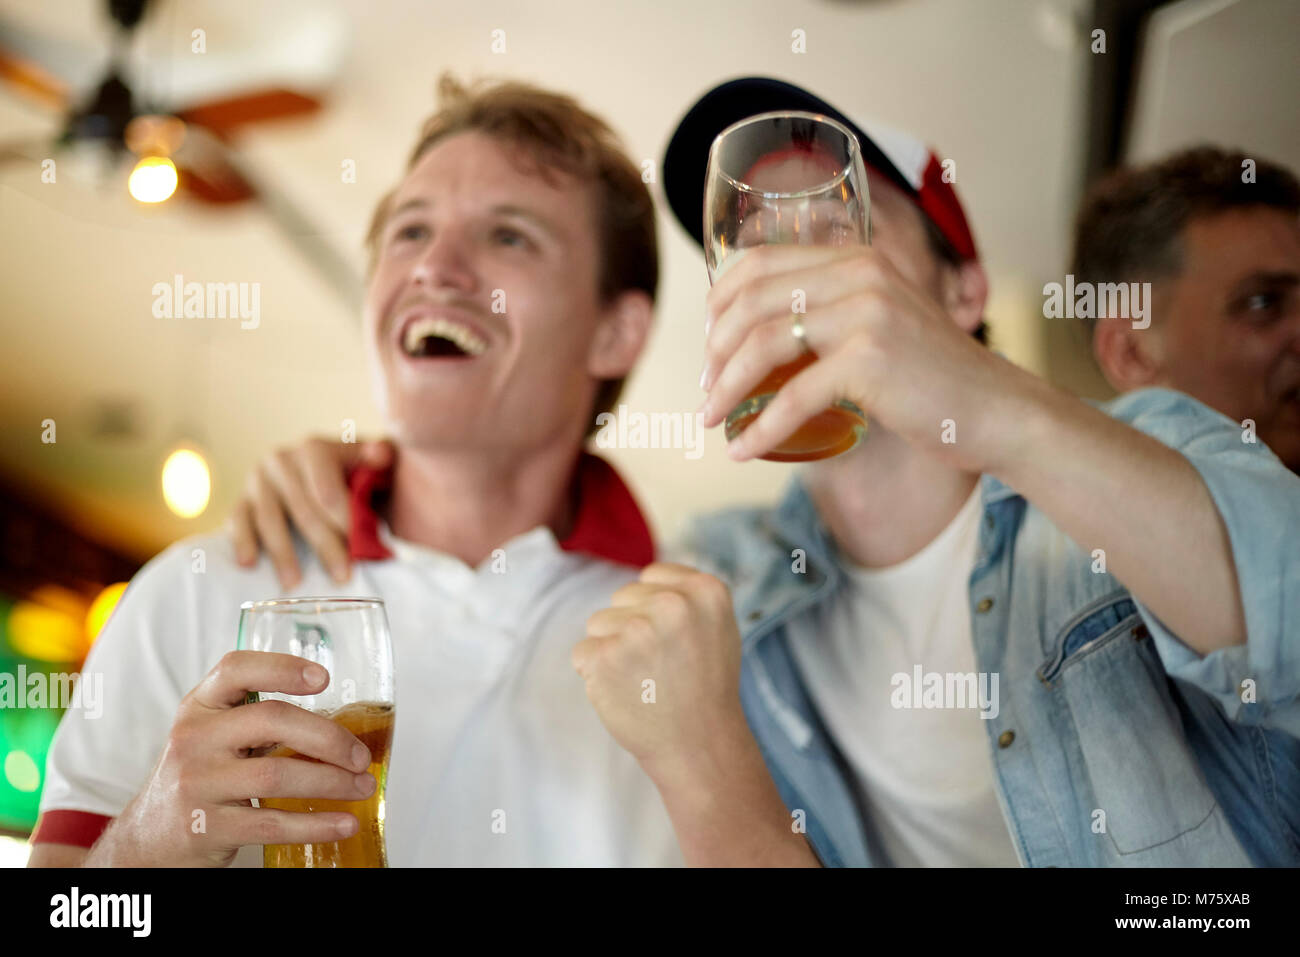 Sports enthusiasts watching match together in bar Stock Photo